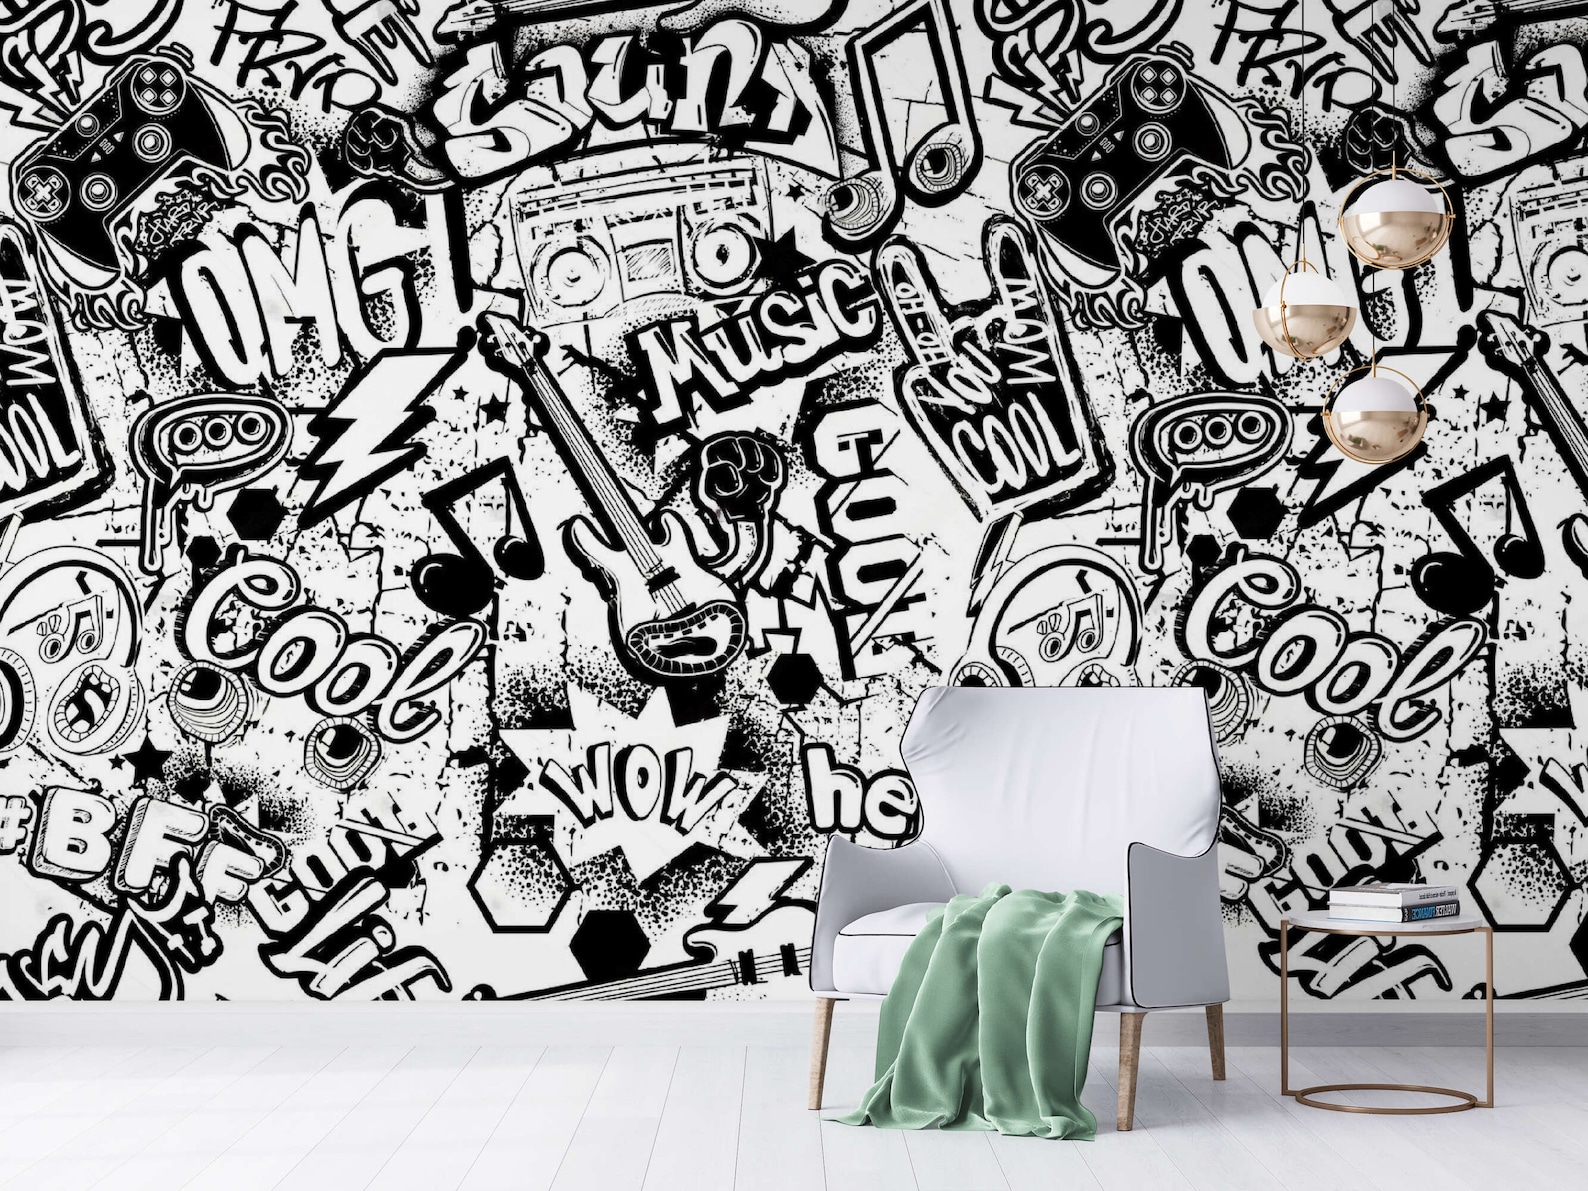 Black and White Graffiti Wall Mural for Accent Wall Decor - Etsy